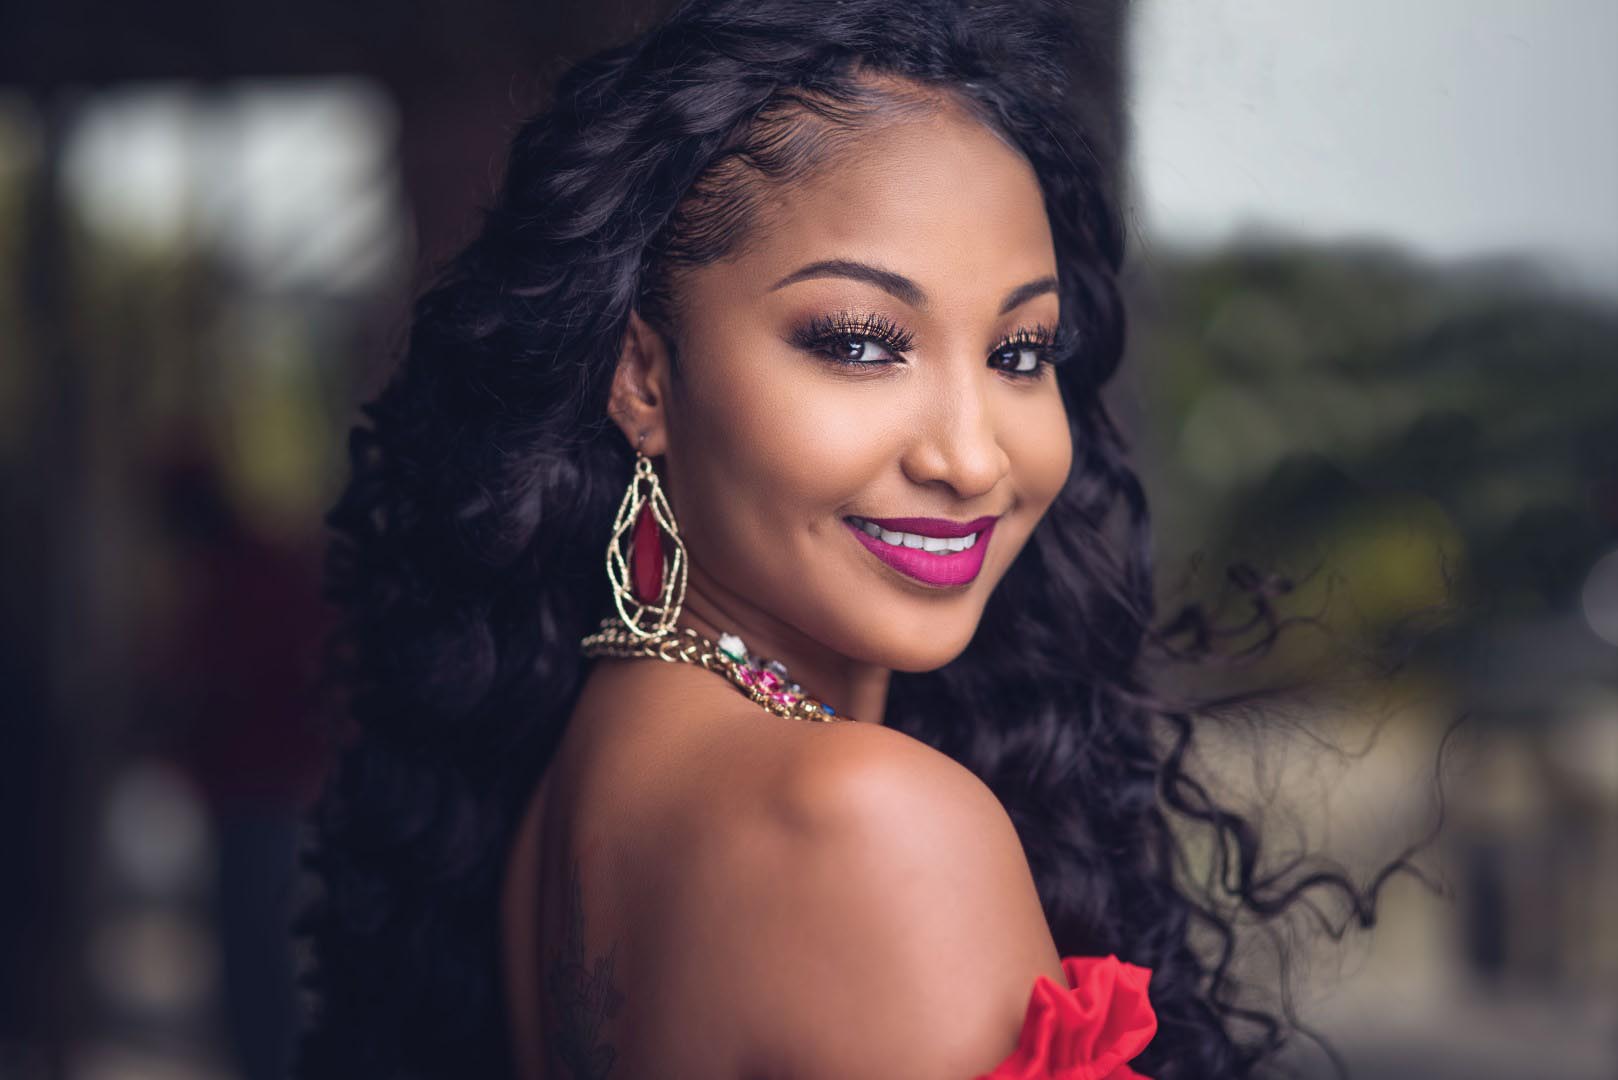 fathers Throwback: Shenseea - The World is Hers for the Taking